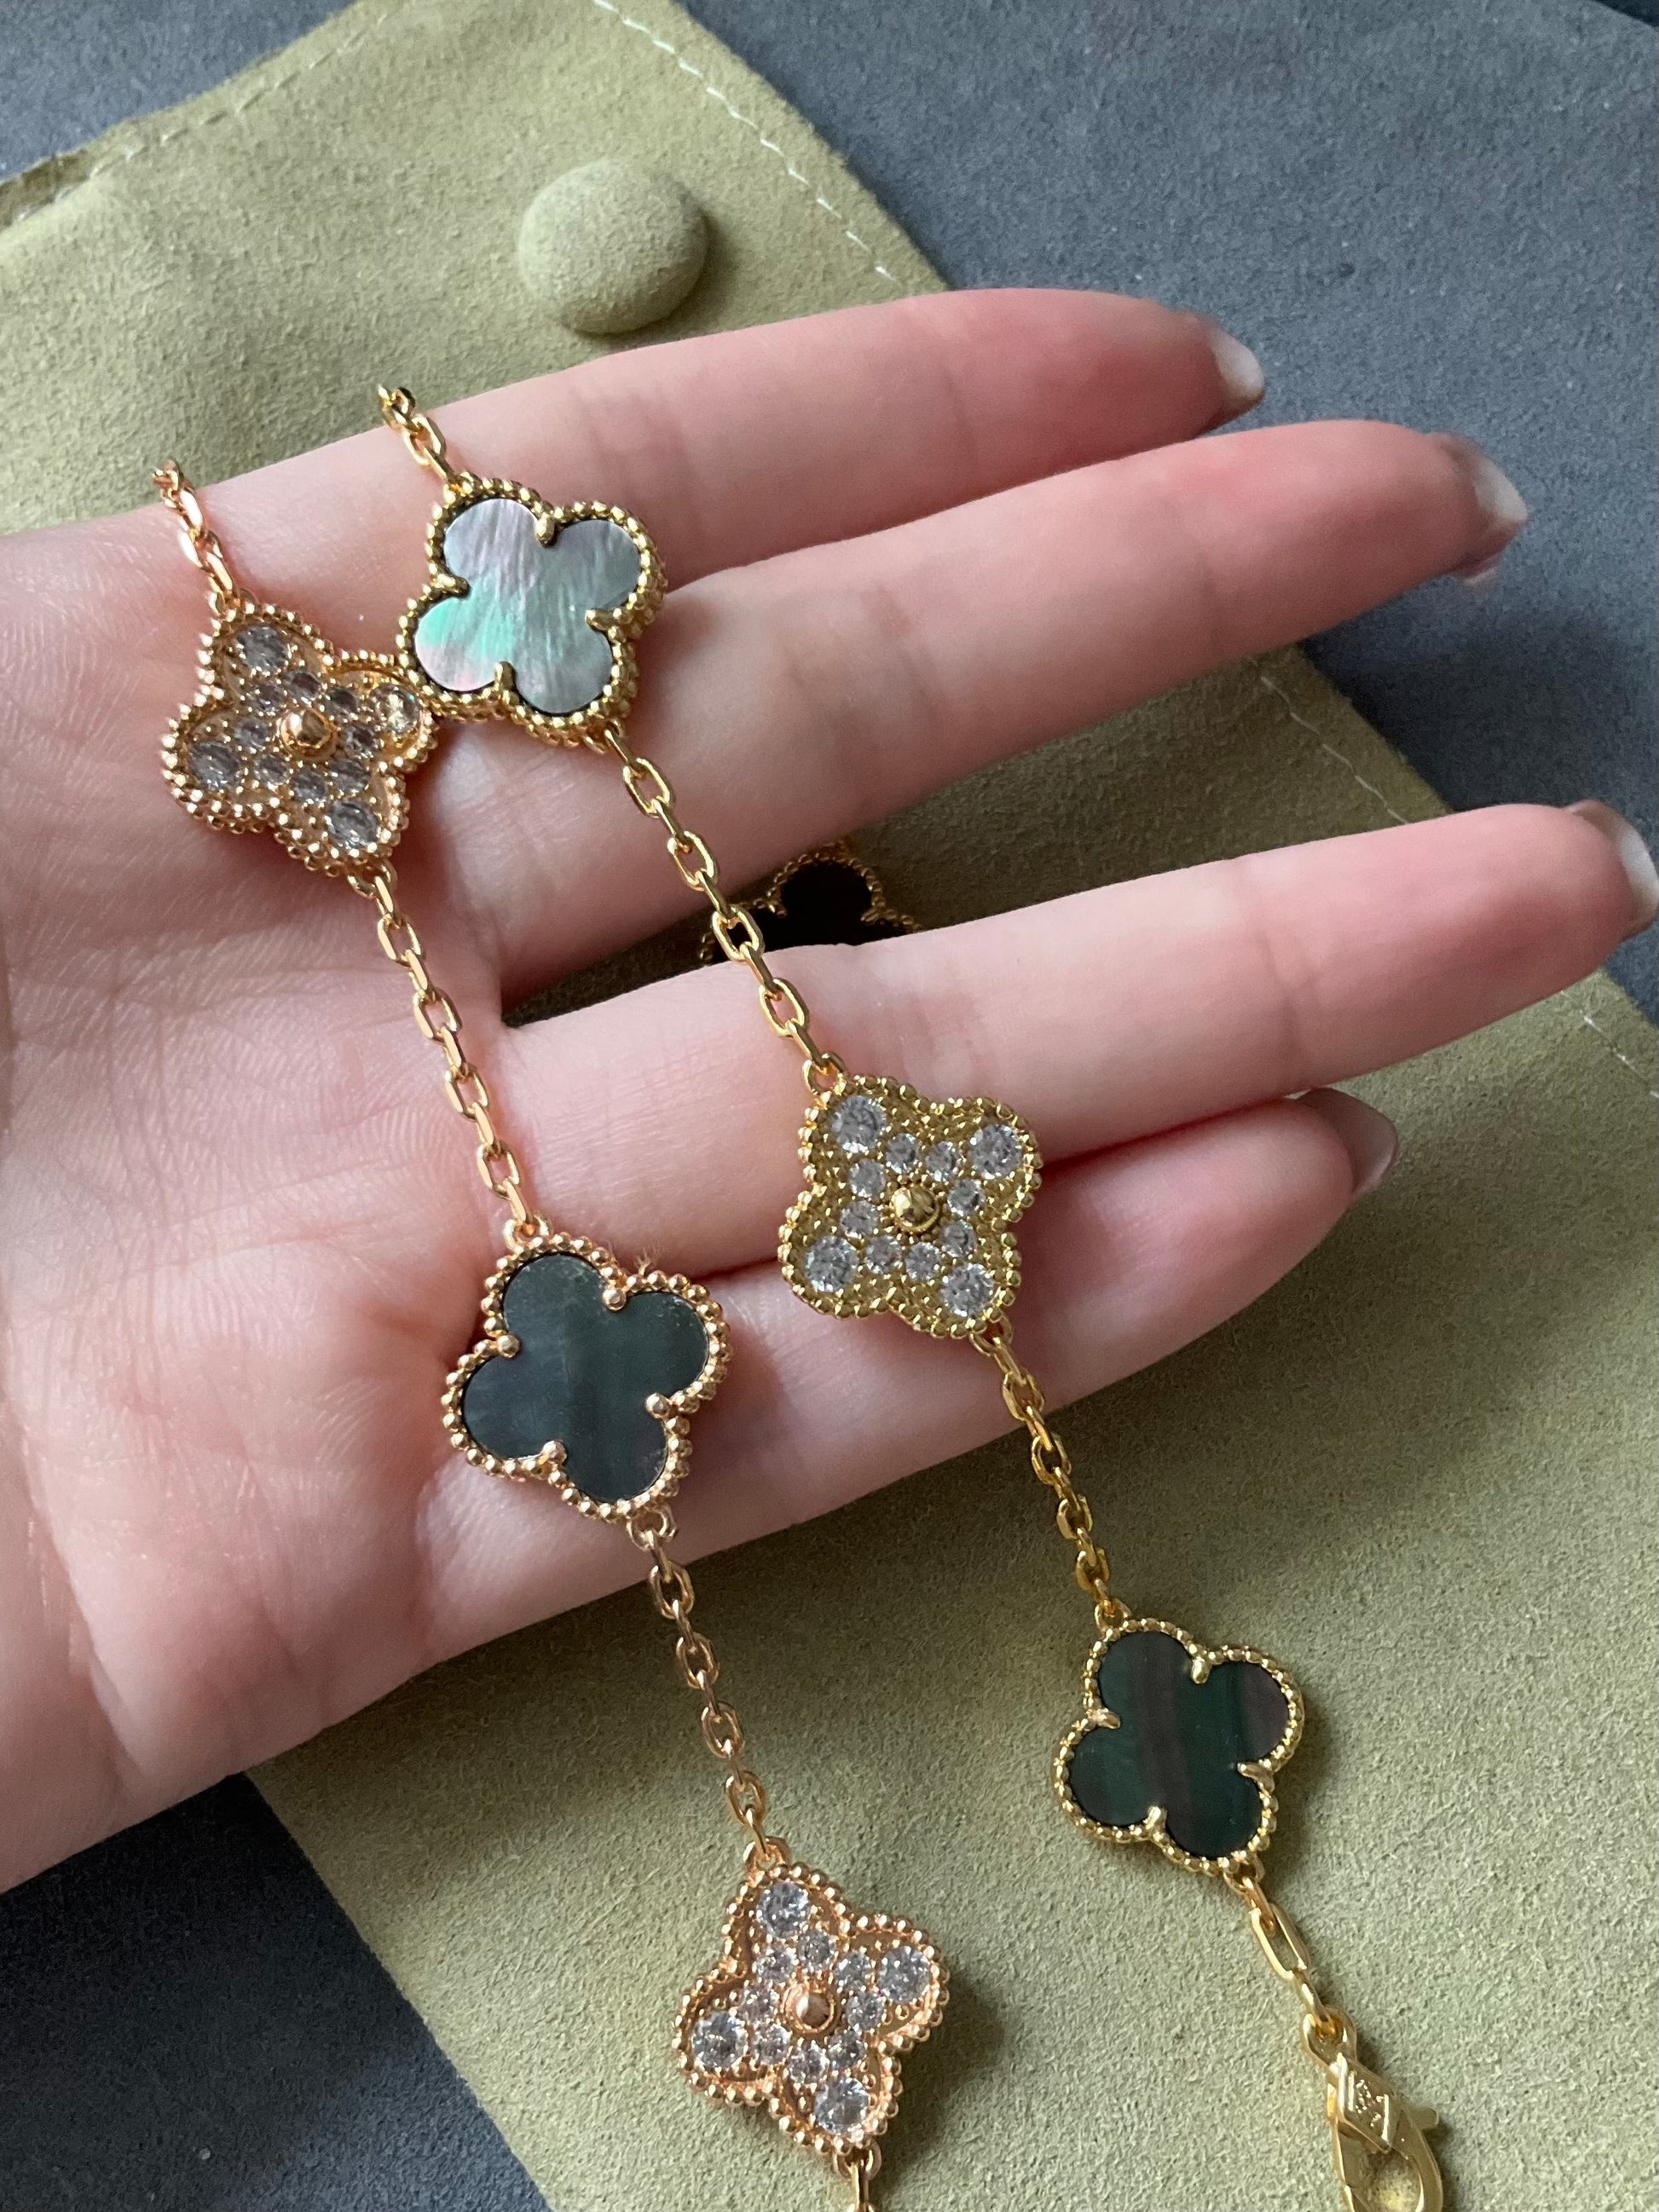 5 motifs 15mm cz clover grey mother of pearl clover bracelet 925 silver with 18k gold plated 7.5 inches - ParadiseKissCo